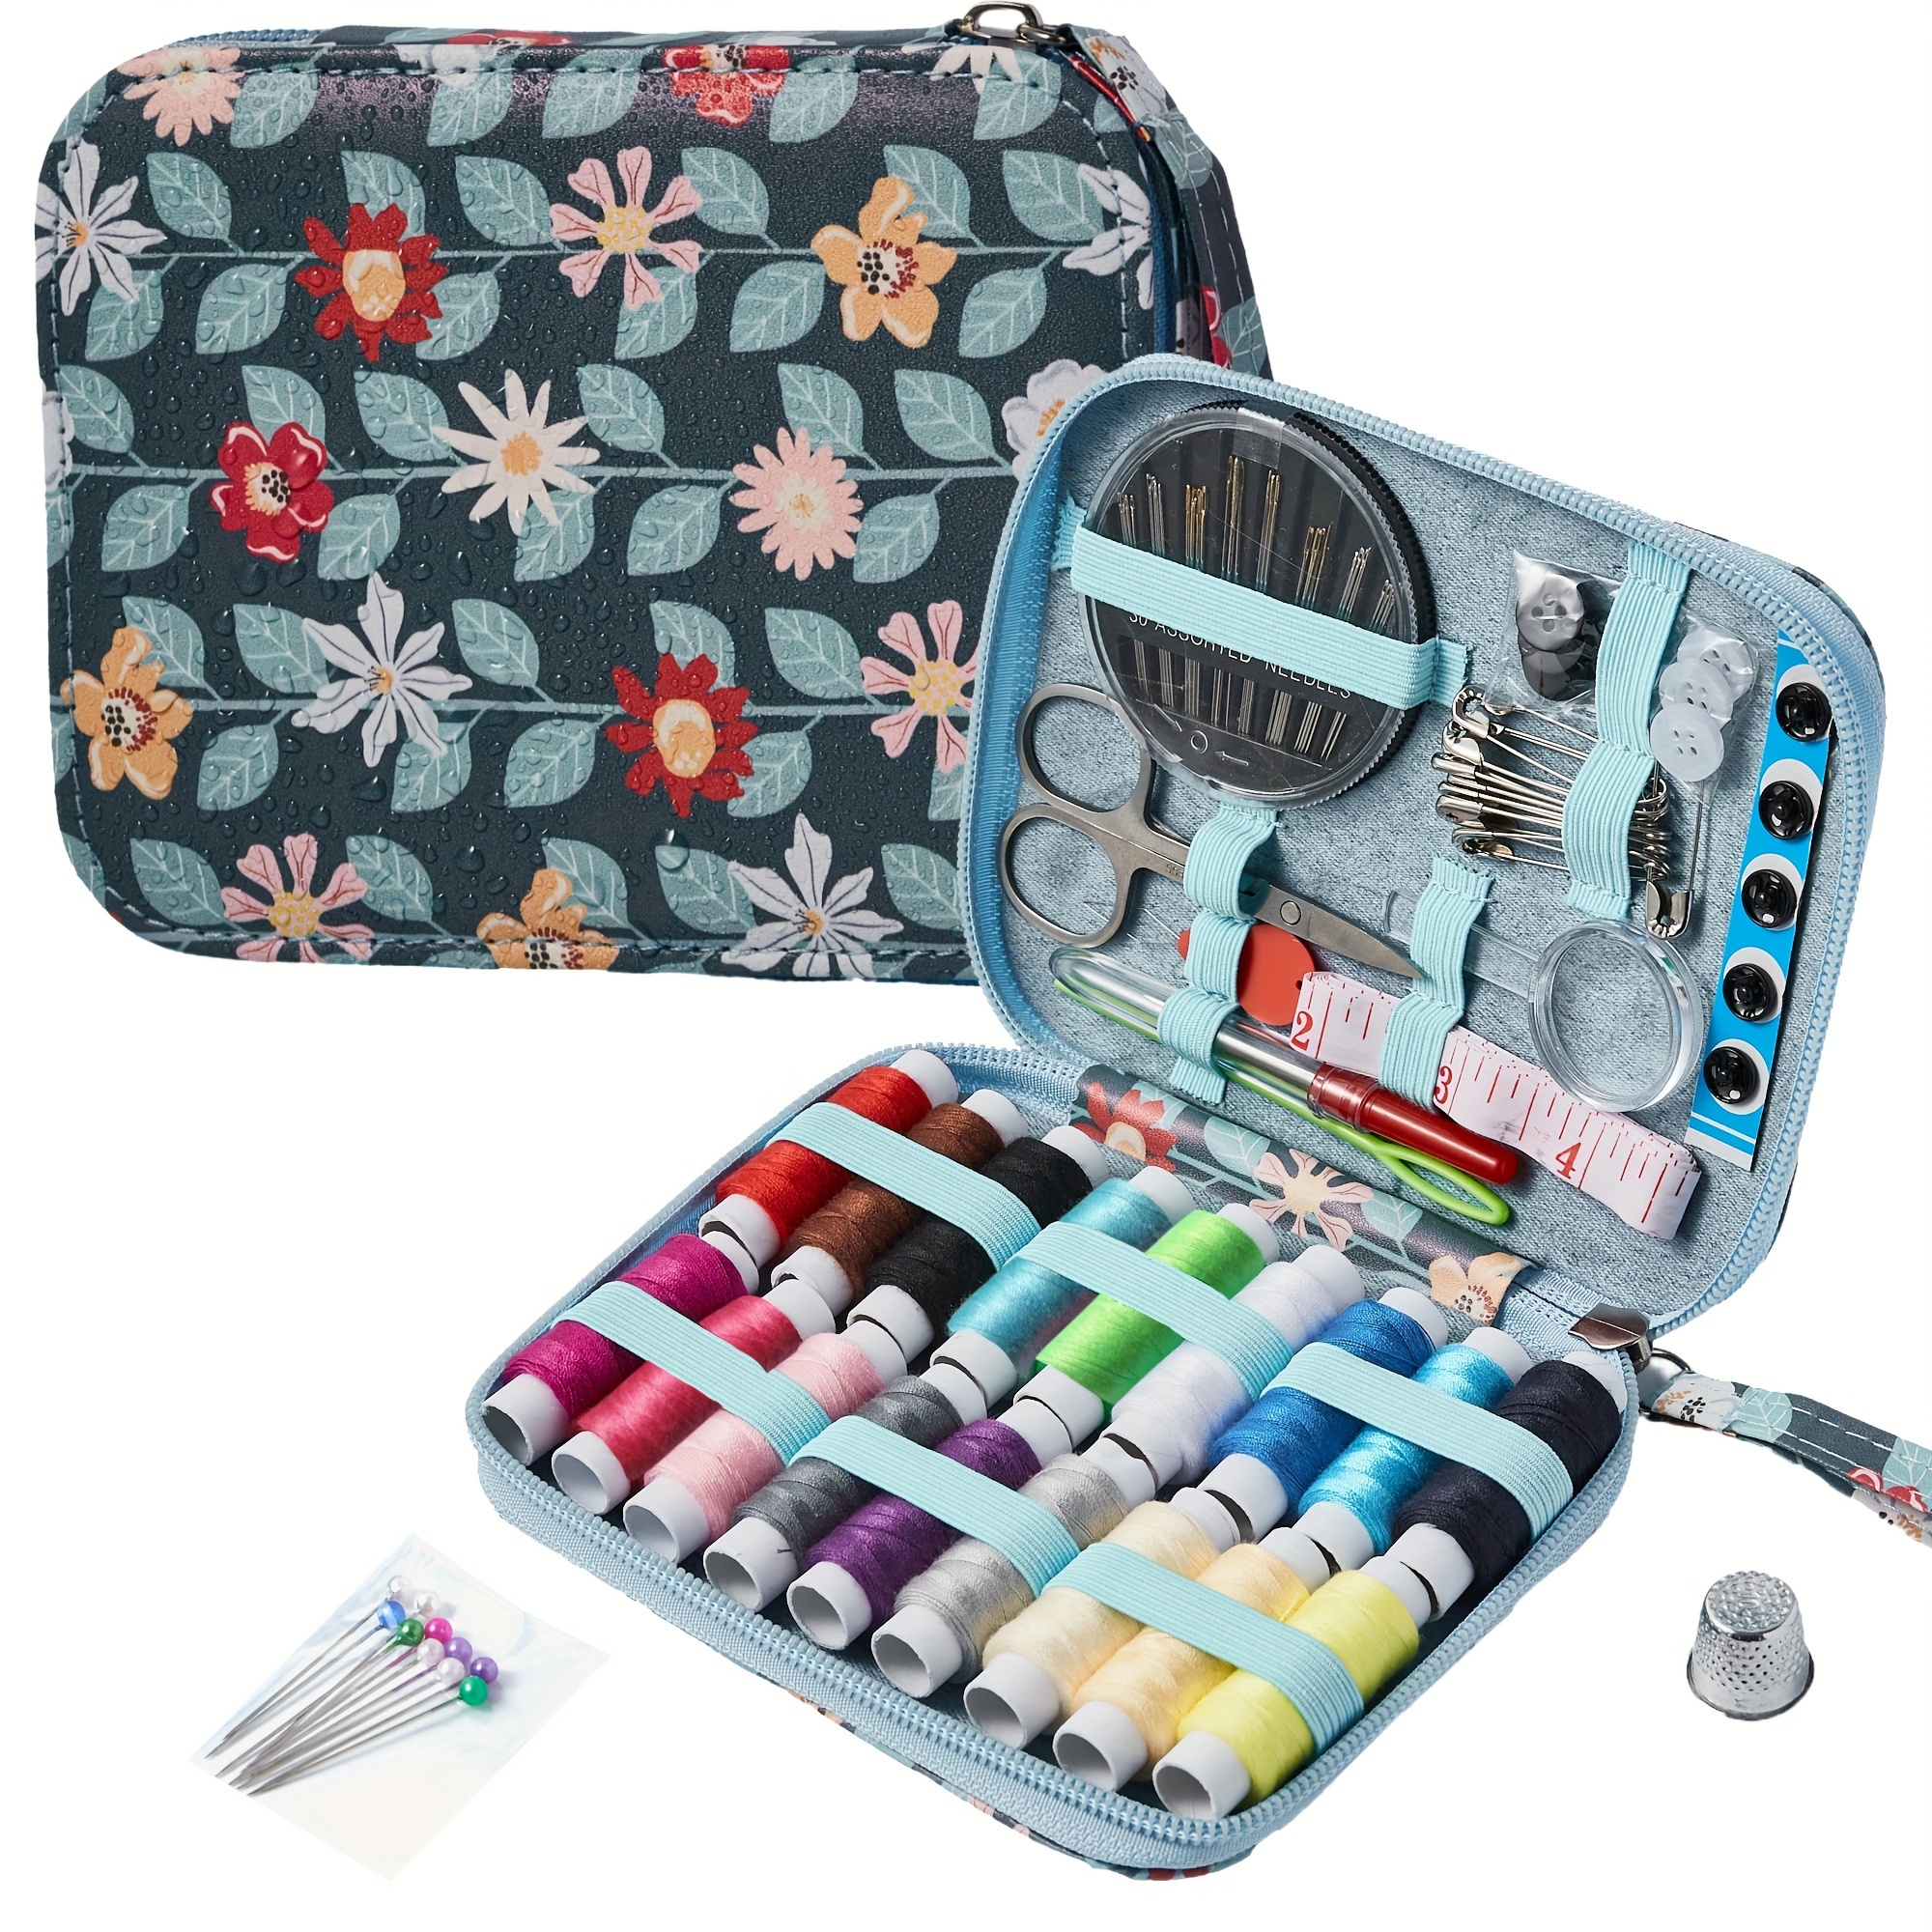 

87-piece Deluxe Sewing Kit With Scissors, Tape Measure & Needle Threader - Complete Emergency Repair Set For Adults, Beginners, Home & Travel Use - Dark Green